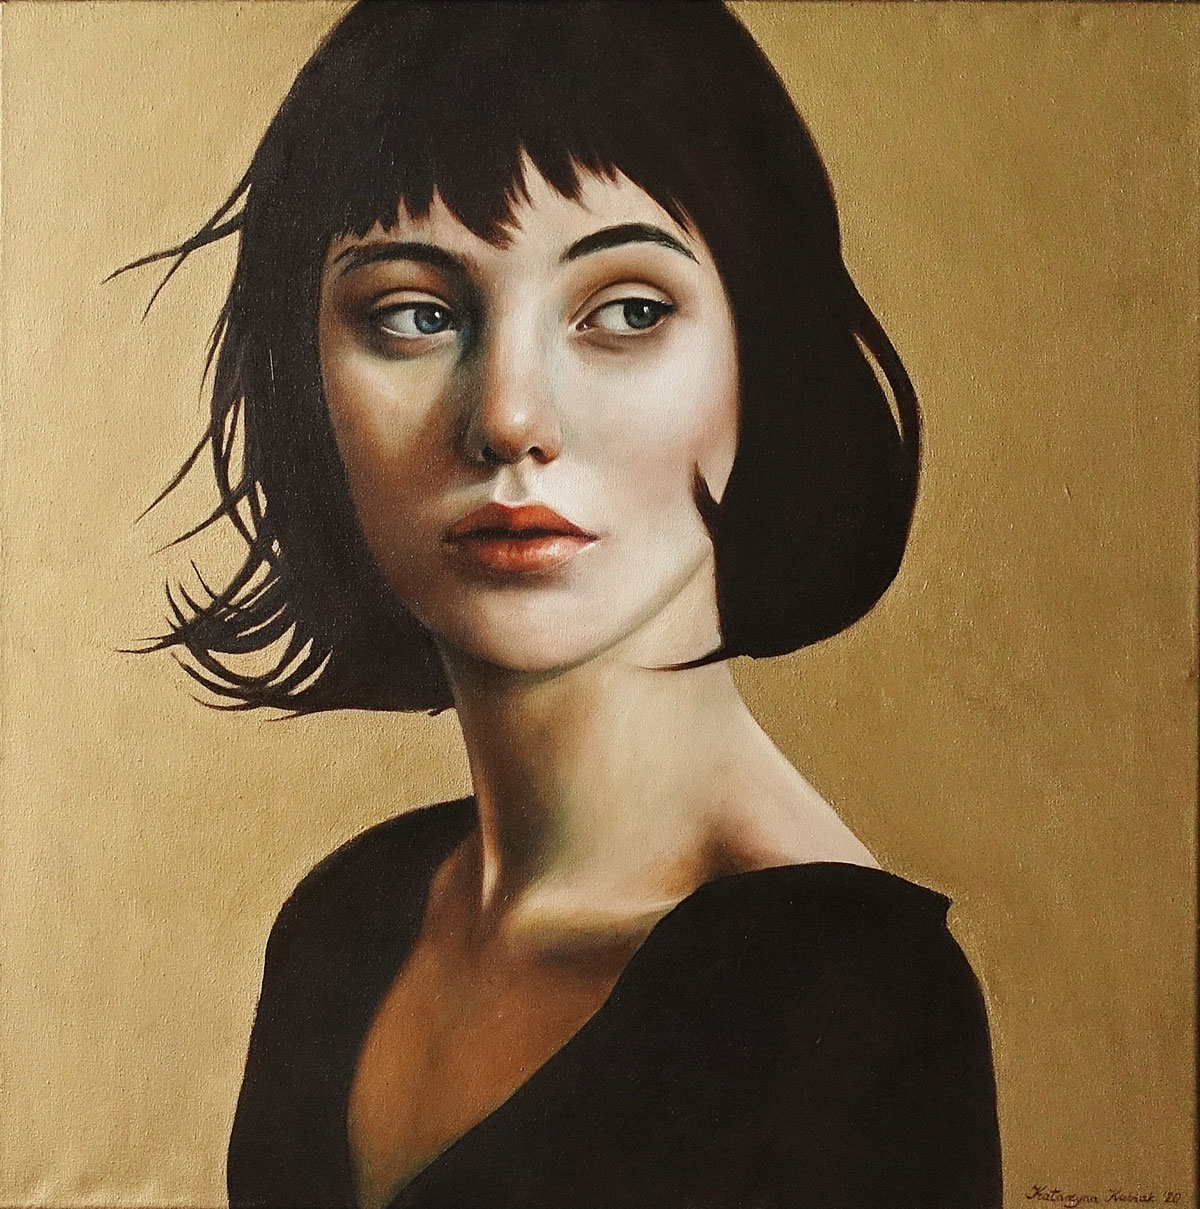 Katarzyna Kubiak - The girl from the golden wall (Oil on Canvas | Size: 66 x 66 cm | Price: 7500 PLN)